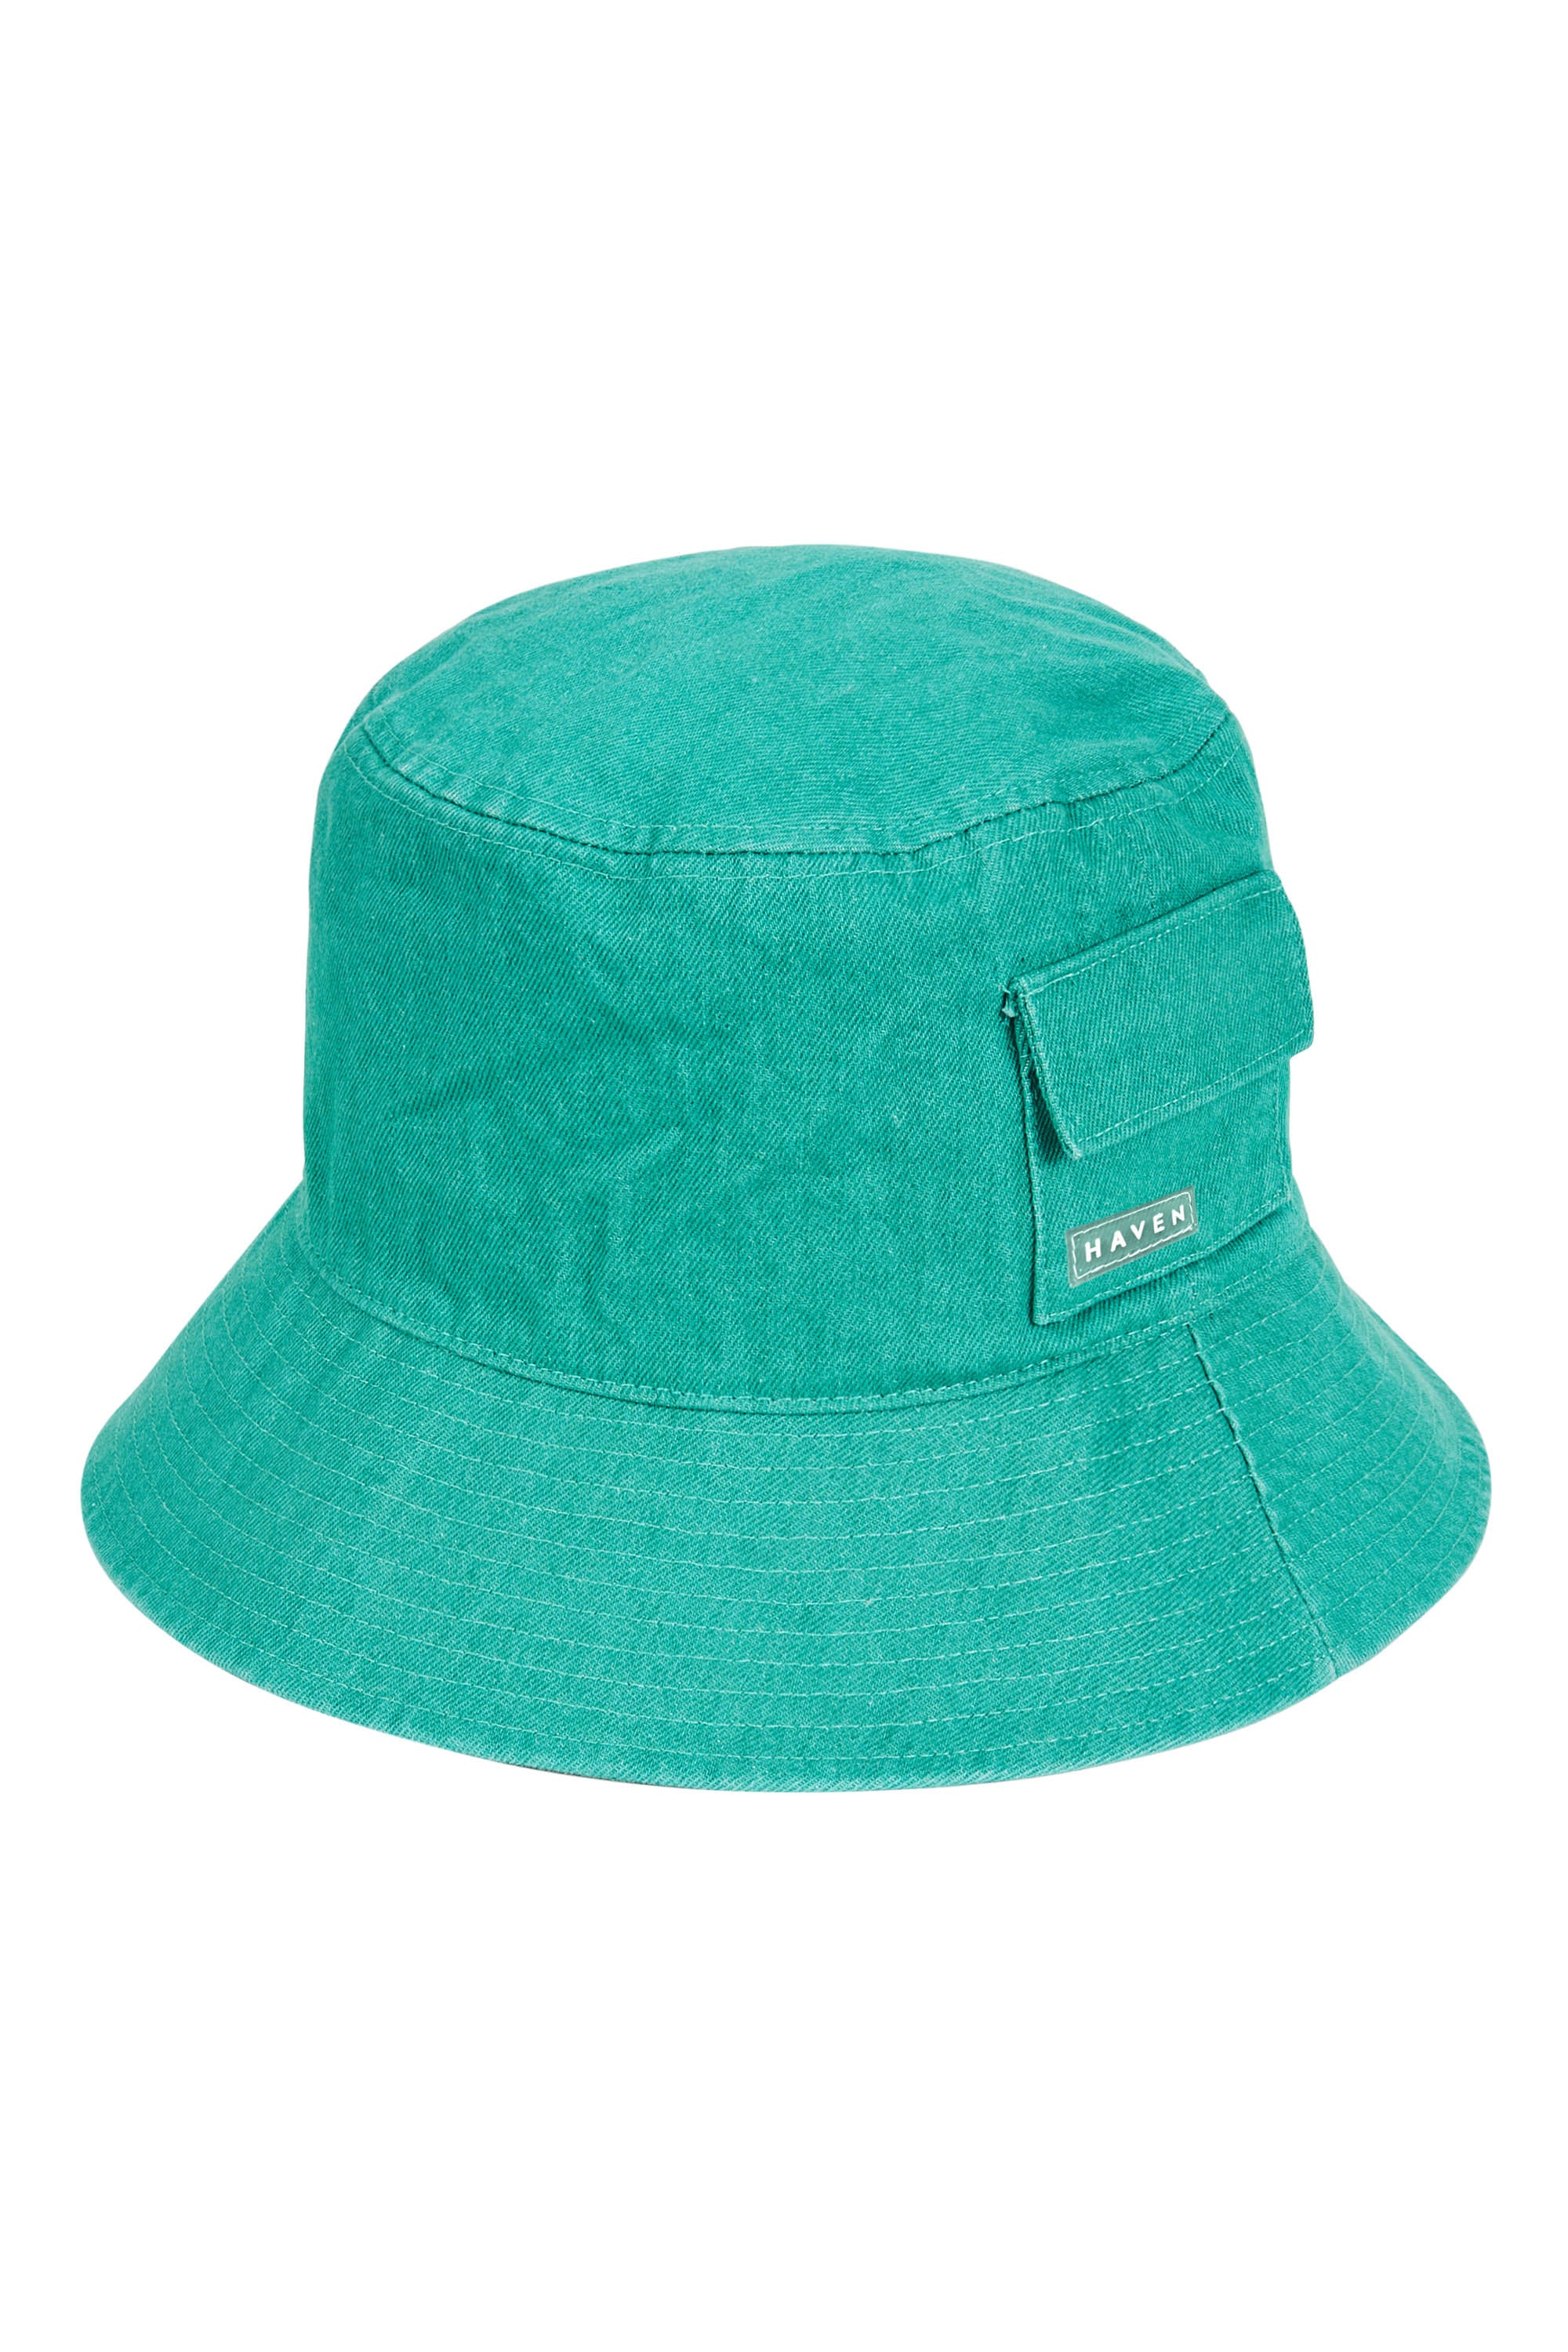 Cayman Bucket Hat - Seagreen – The Haven Co